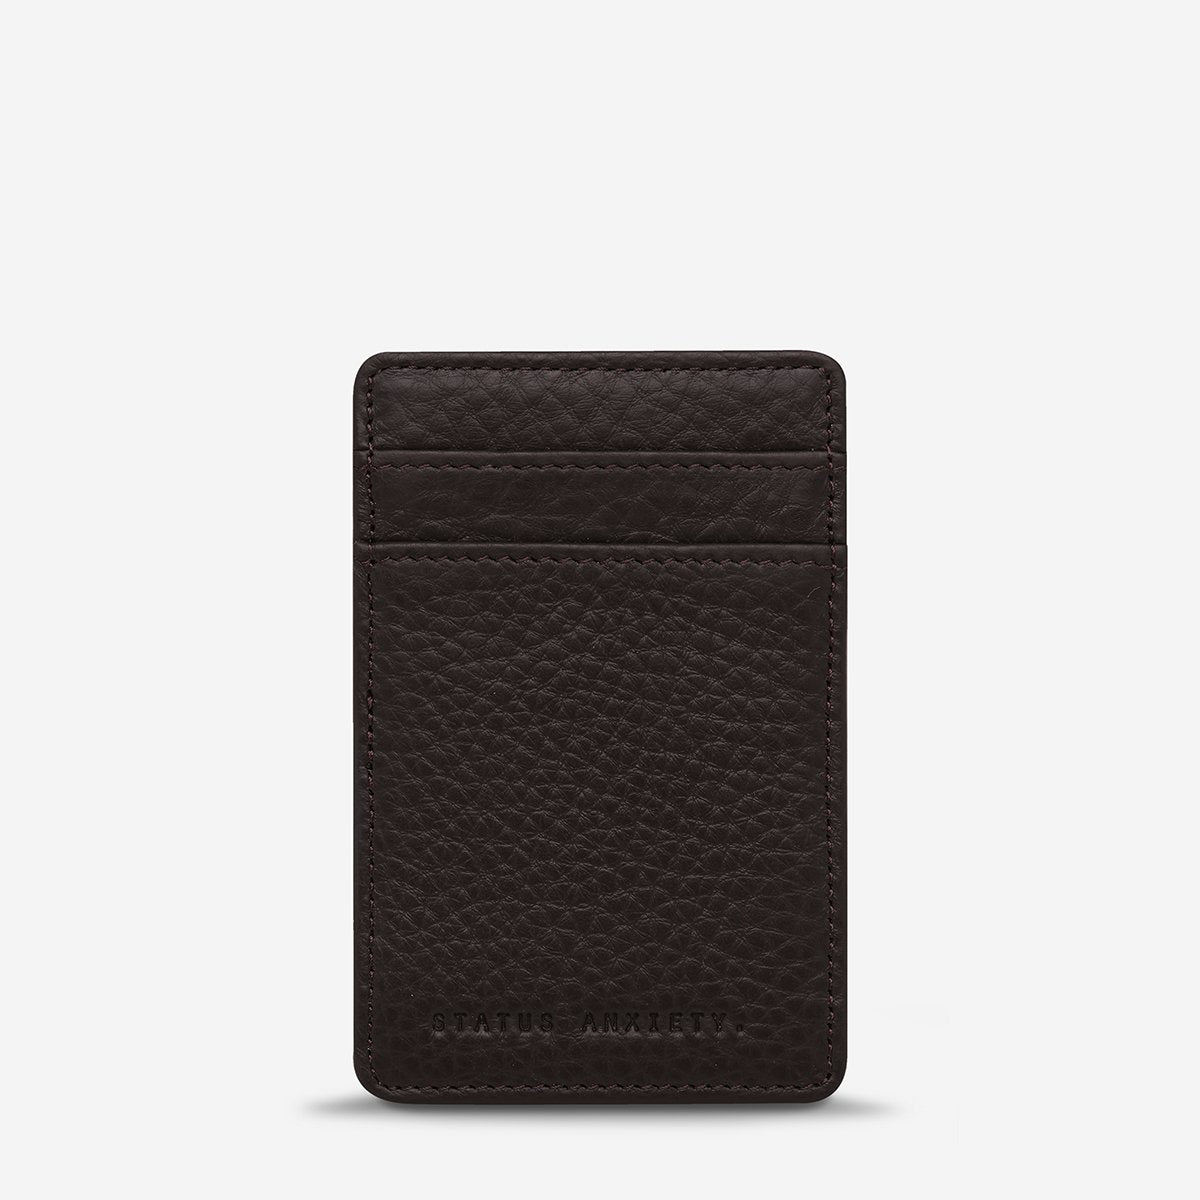 Flip Leather Wallet in Chocolate